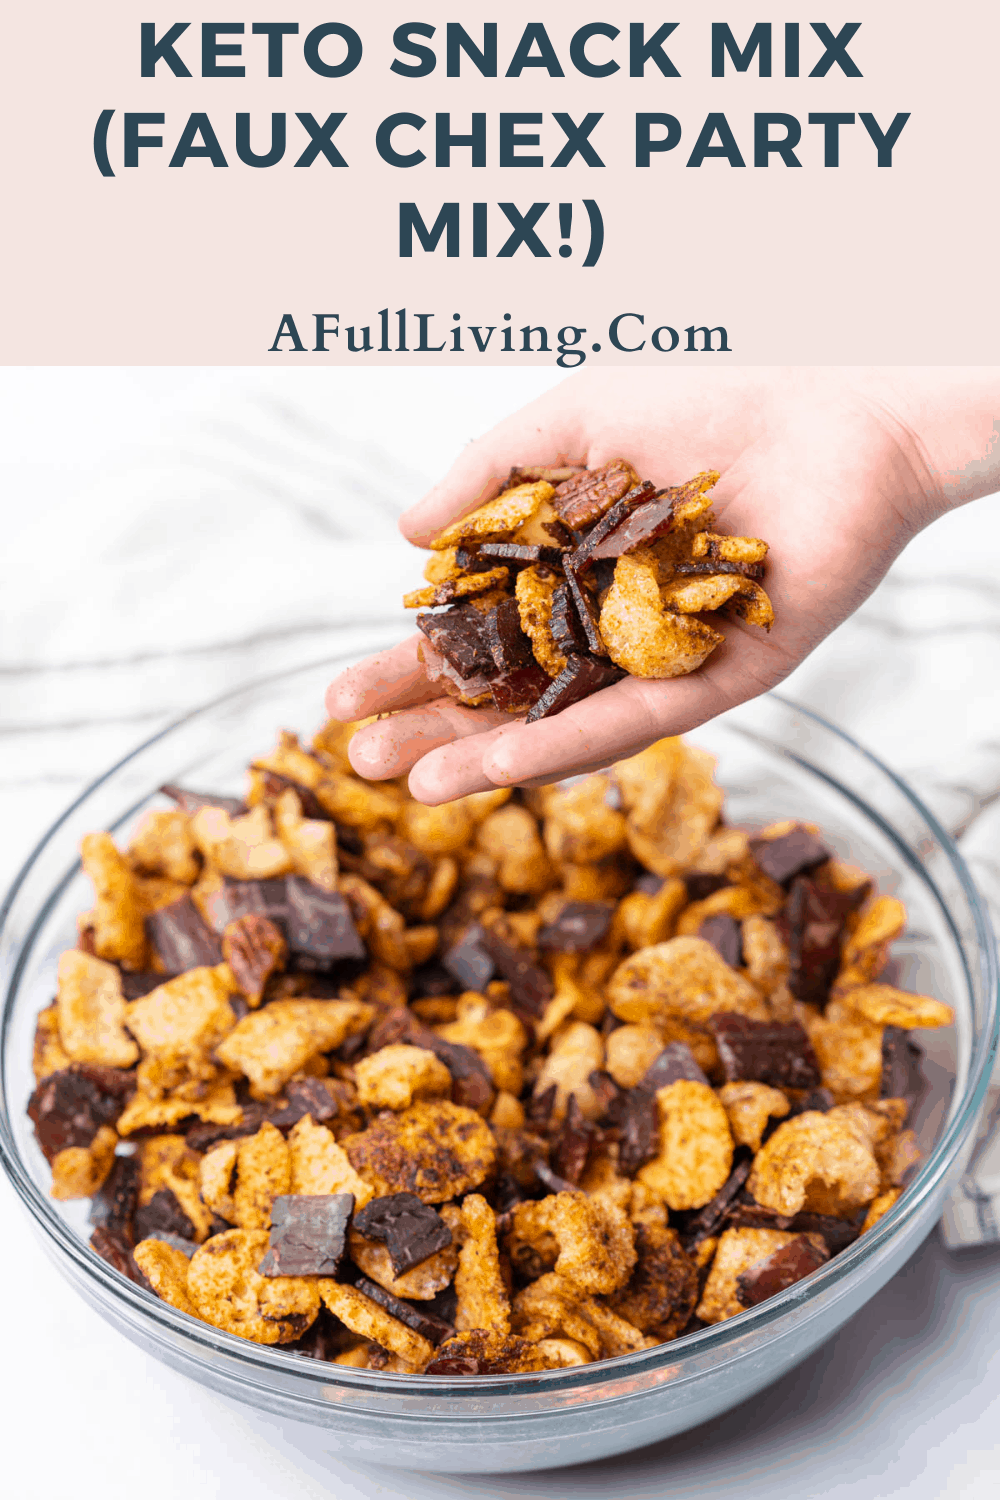 Keto Snack Mix (Faux Chex Party Mix!) graphic with text